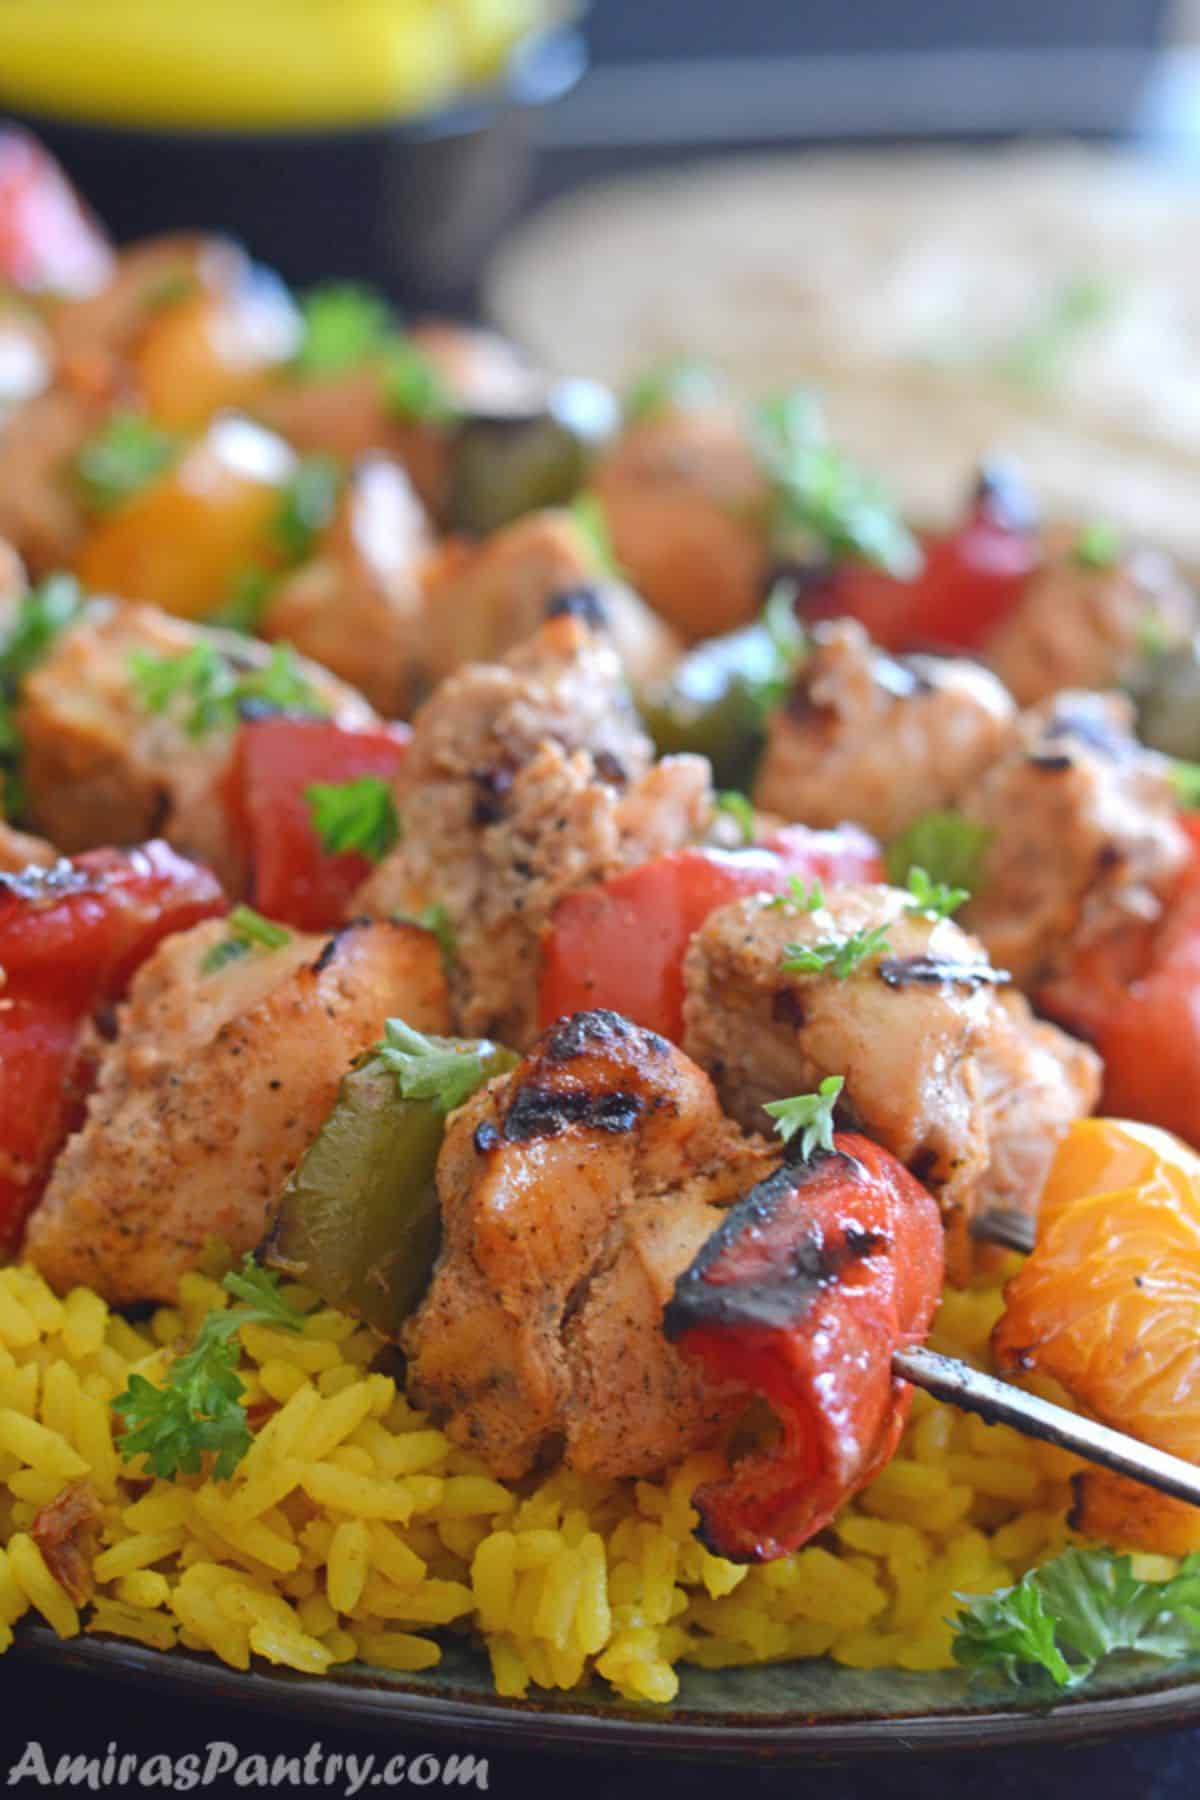 A close up of food, with Chicken kabob skewers on a plate.